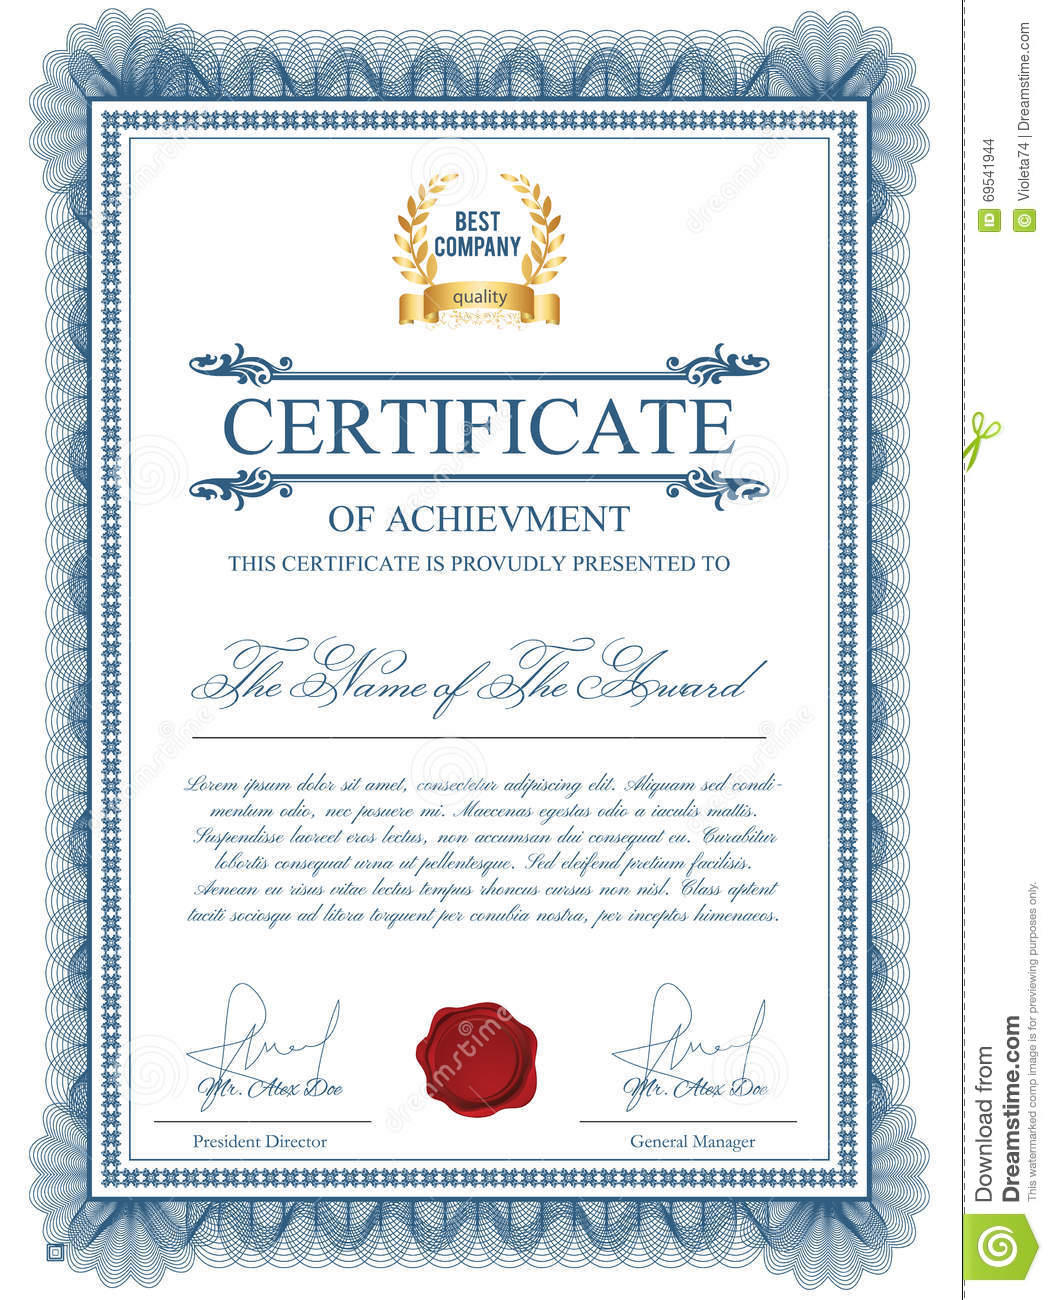 Certificate Template With Guilloche Elements. Stock Vector Intended For Validation Certificate Template